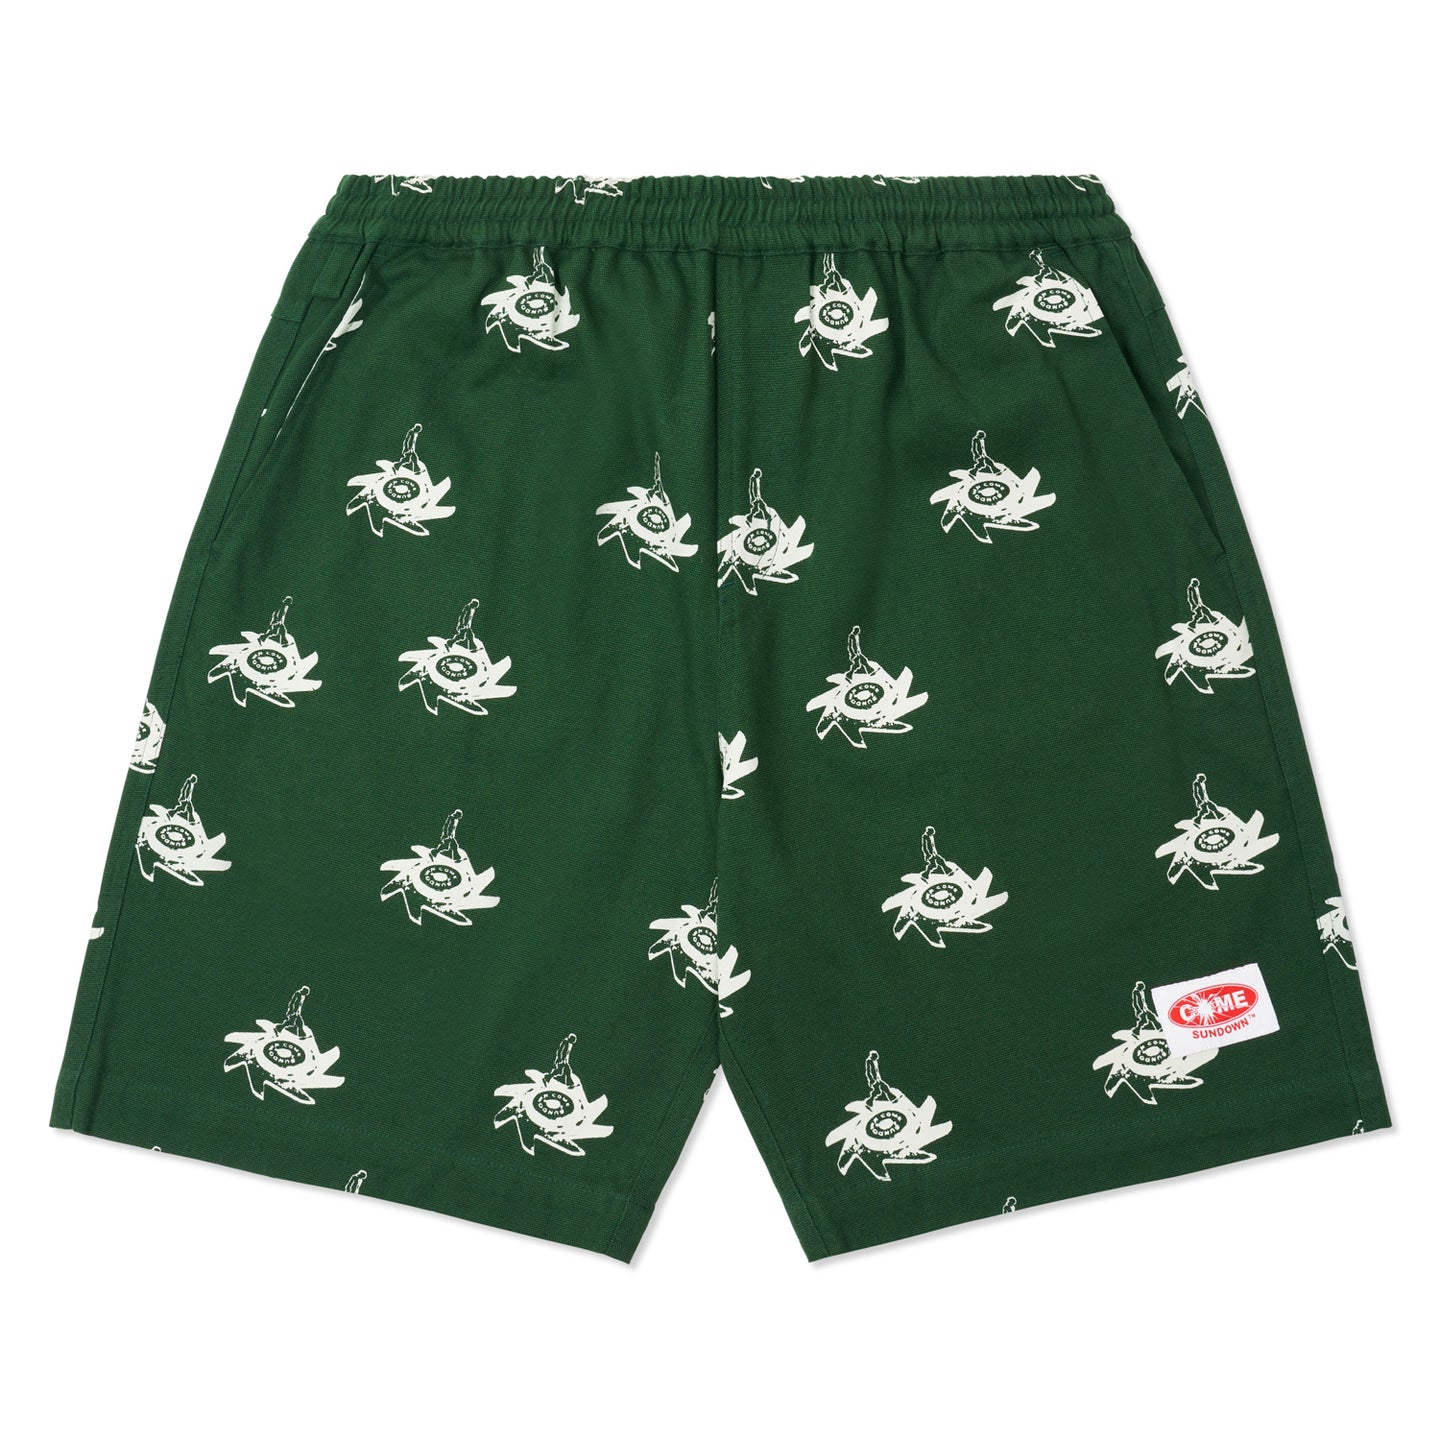 BLADE SHORTS FOREST GREEN